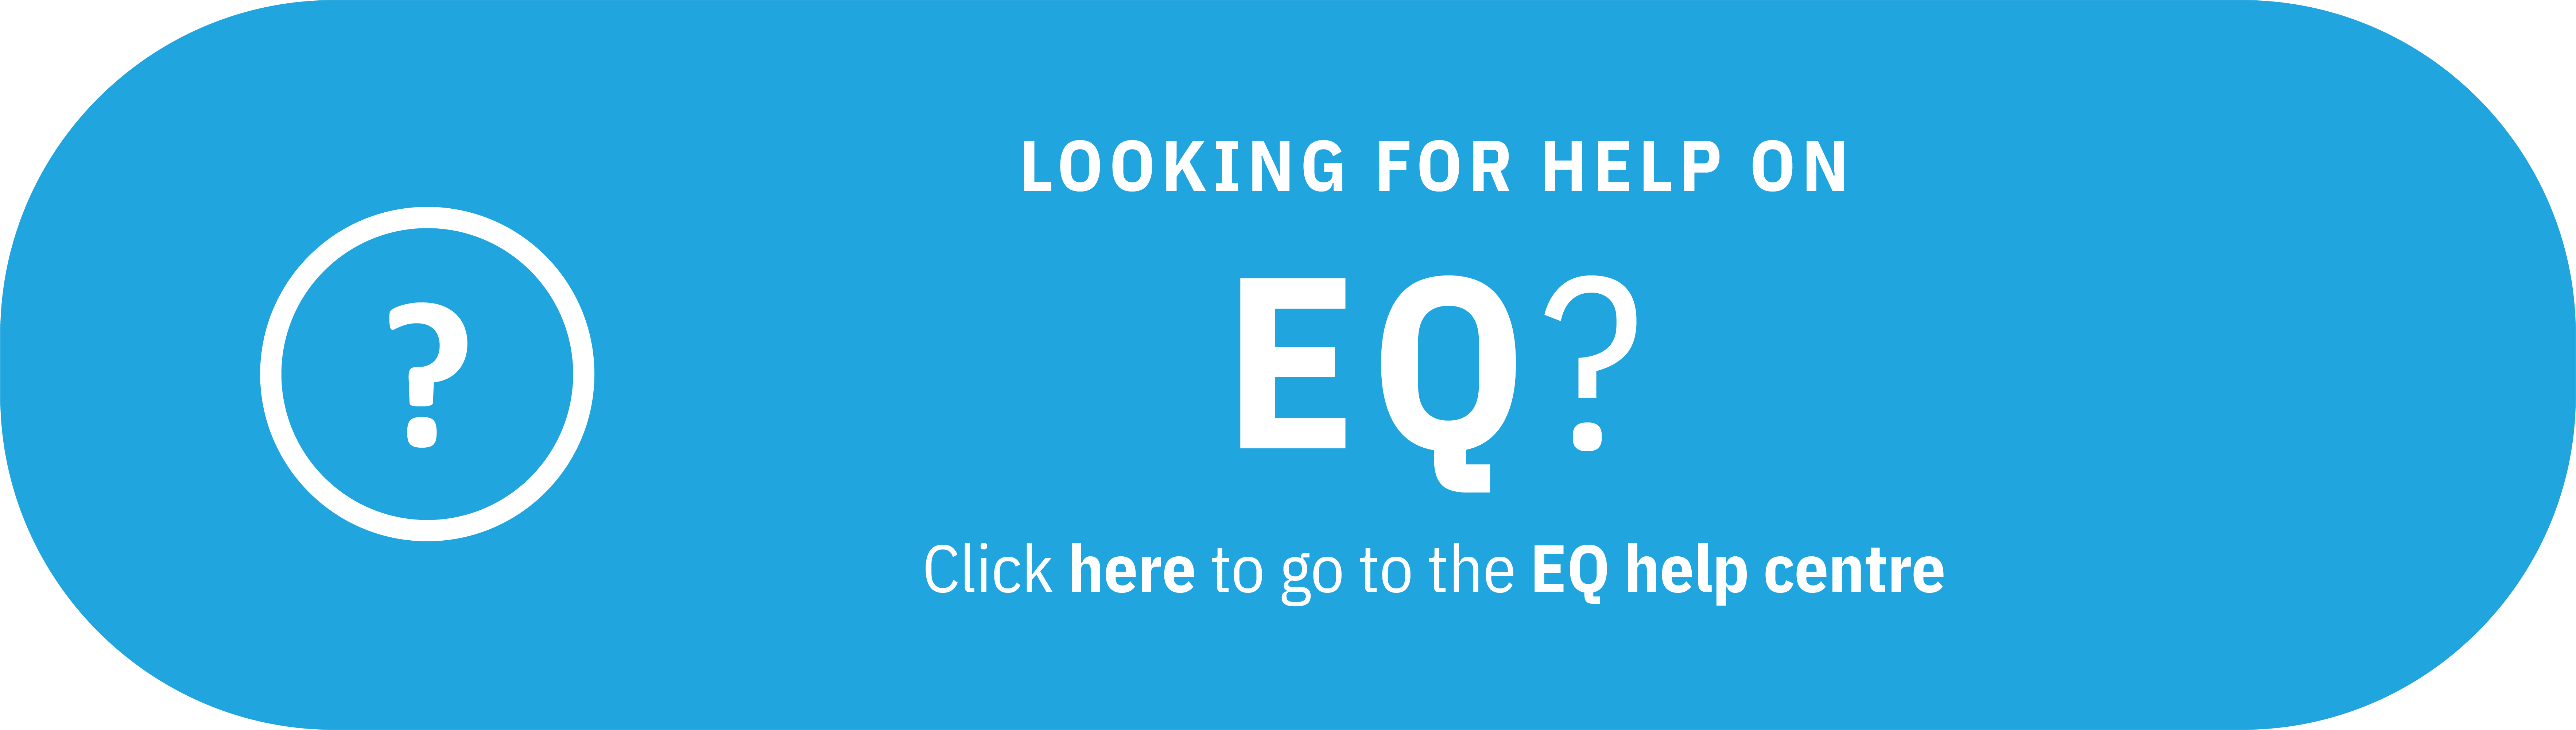 looking_for_EQ_4.png